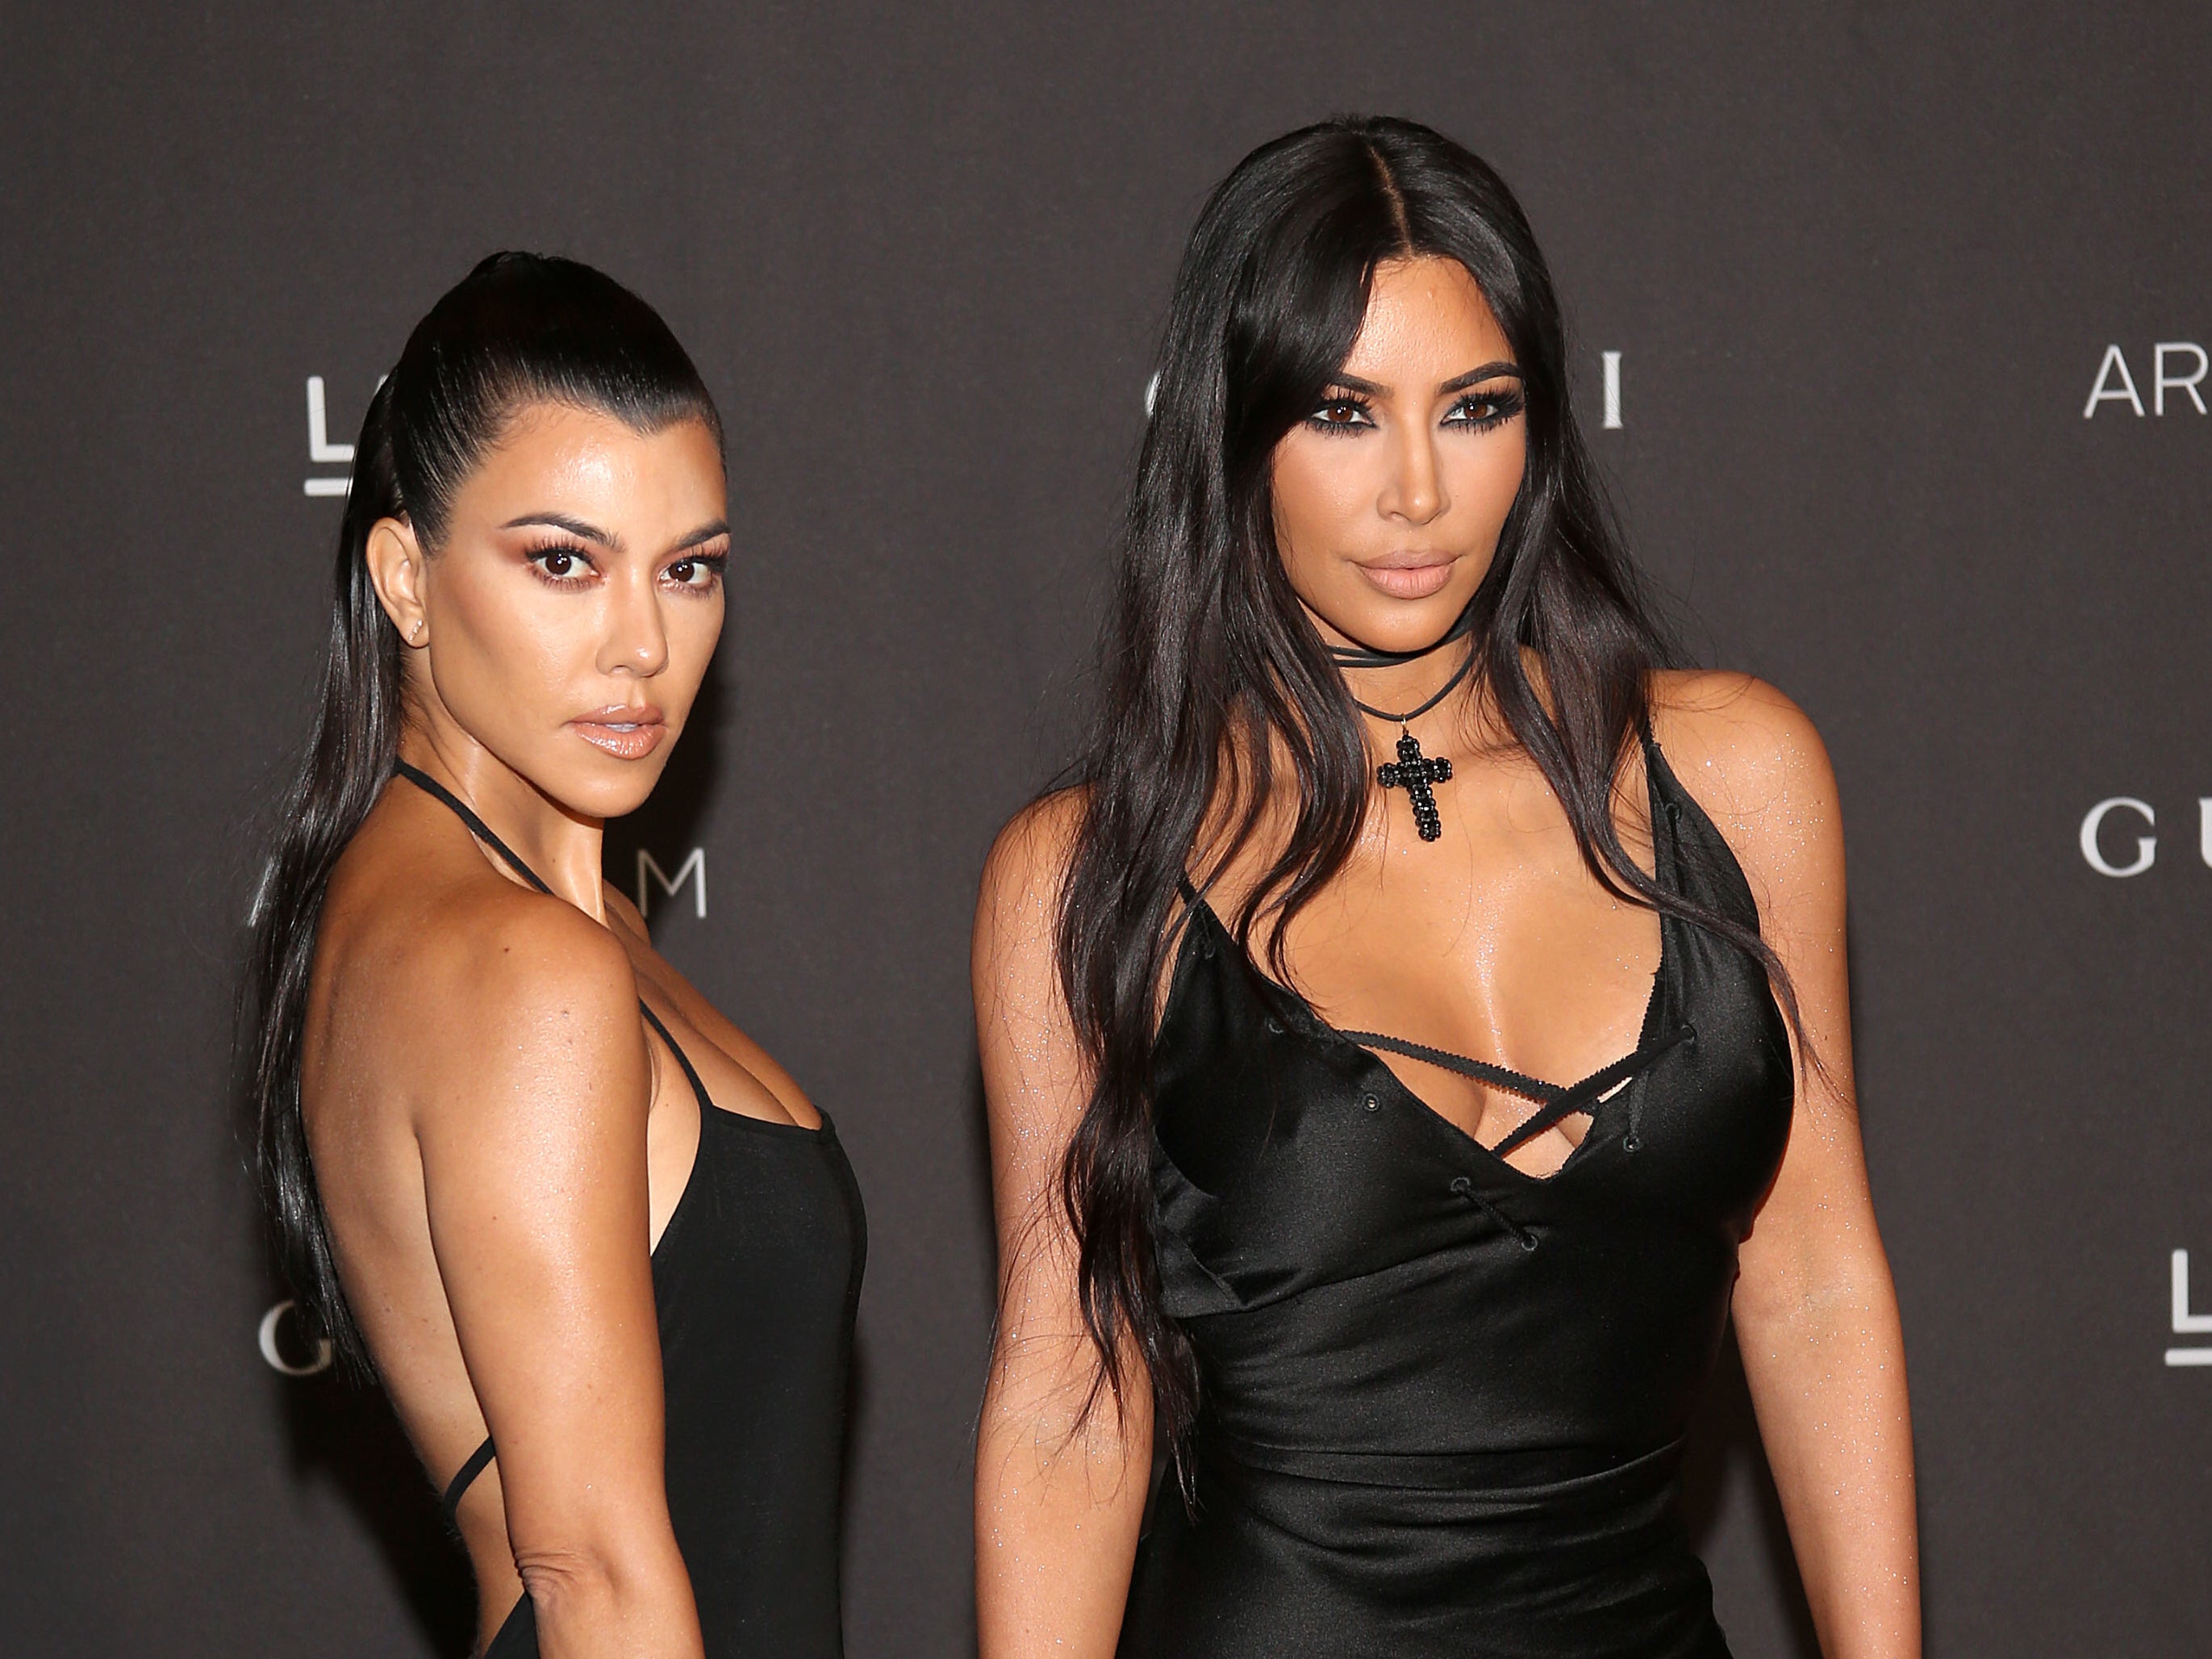 Kourtney agreed with her sister Kim’s controversial comments about work ethic